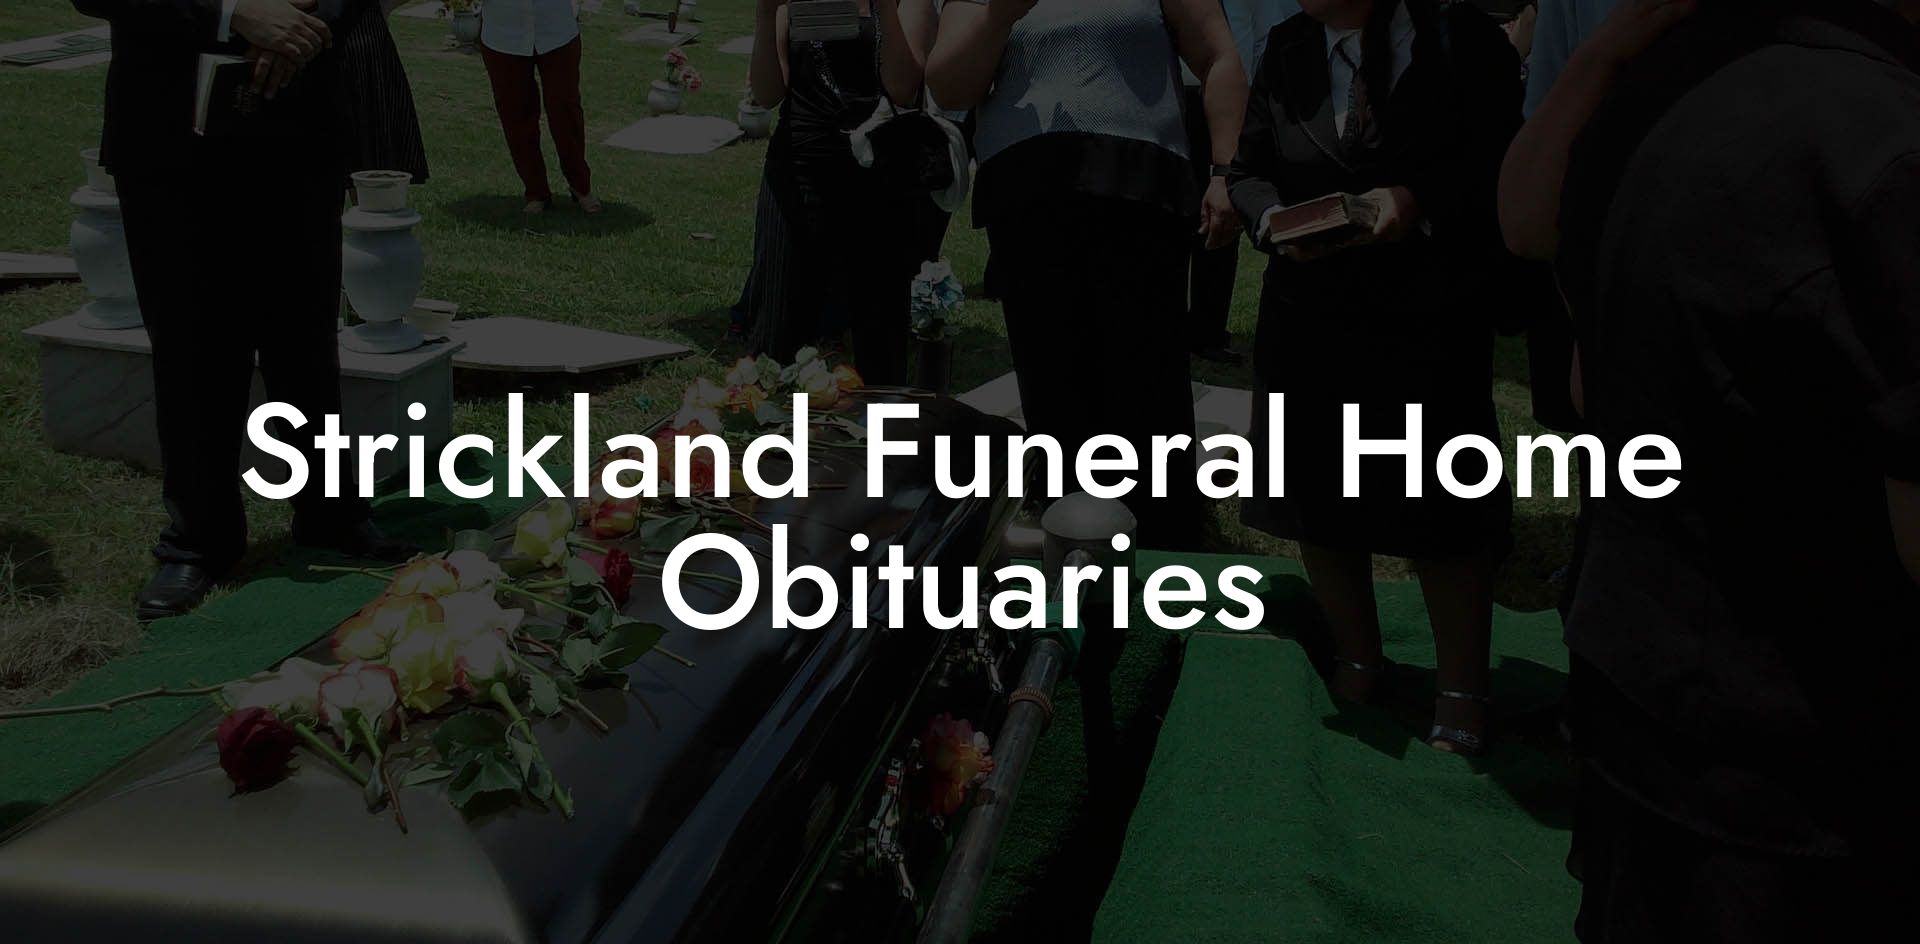 Strickland Funeral Home Obituaries